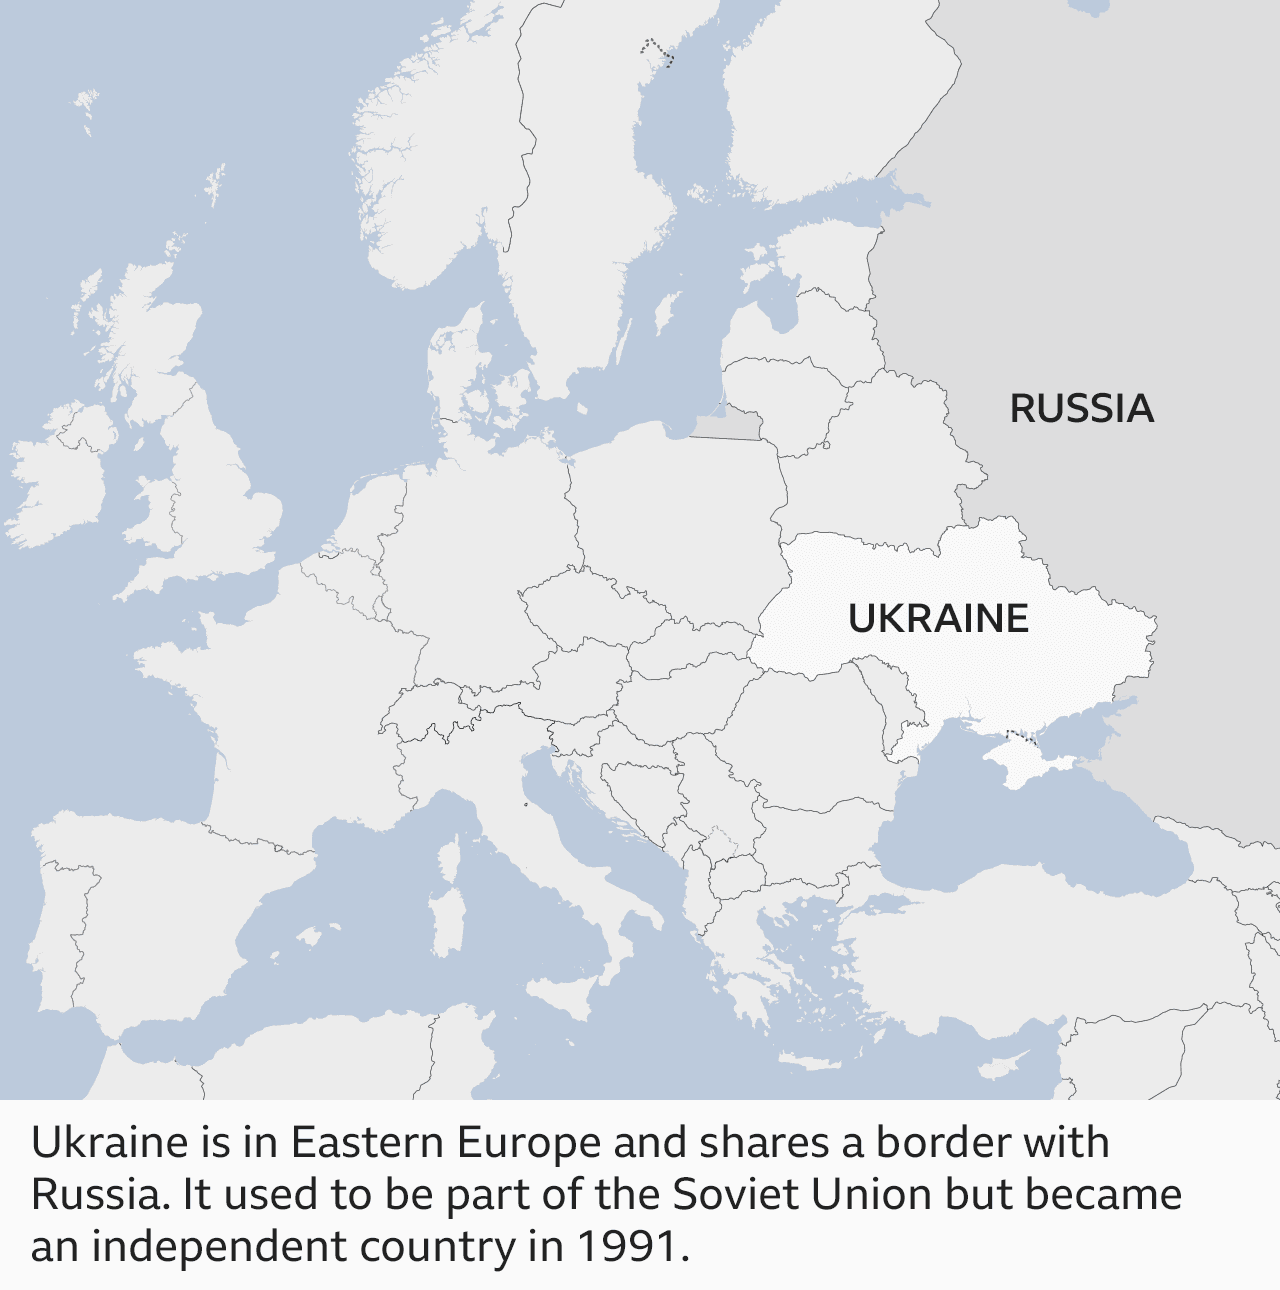 Ukraine is in Eastern Europe and shares a border with Russia. It used to be part of the Soviet Union but became an independent country in 1991.